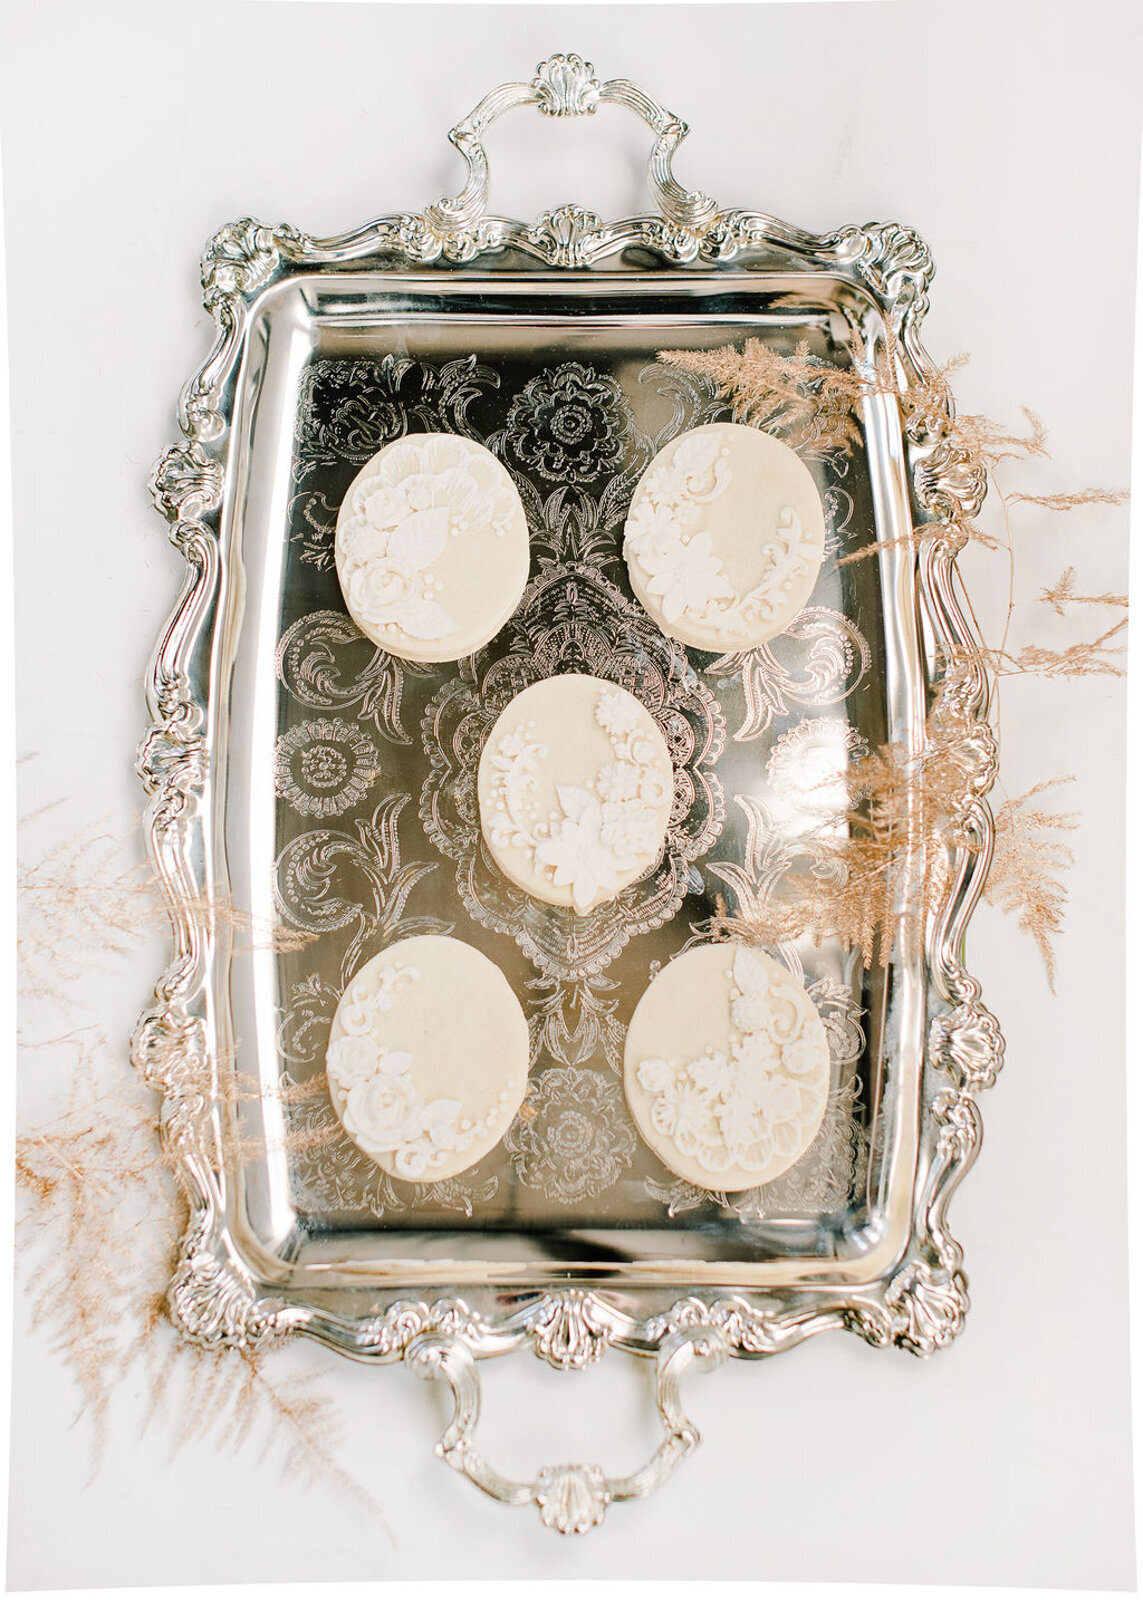 Elegant tray of beautiful handcrafted bespoke wedding sugar cookies, created by Bake My Day, contemporary cakes & desserts in Calgary, Alberta, featured on the Brontë Bride Vendor Guide.